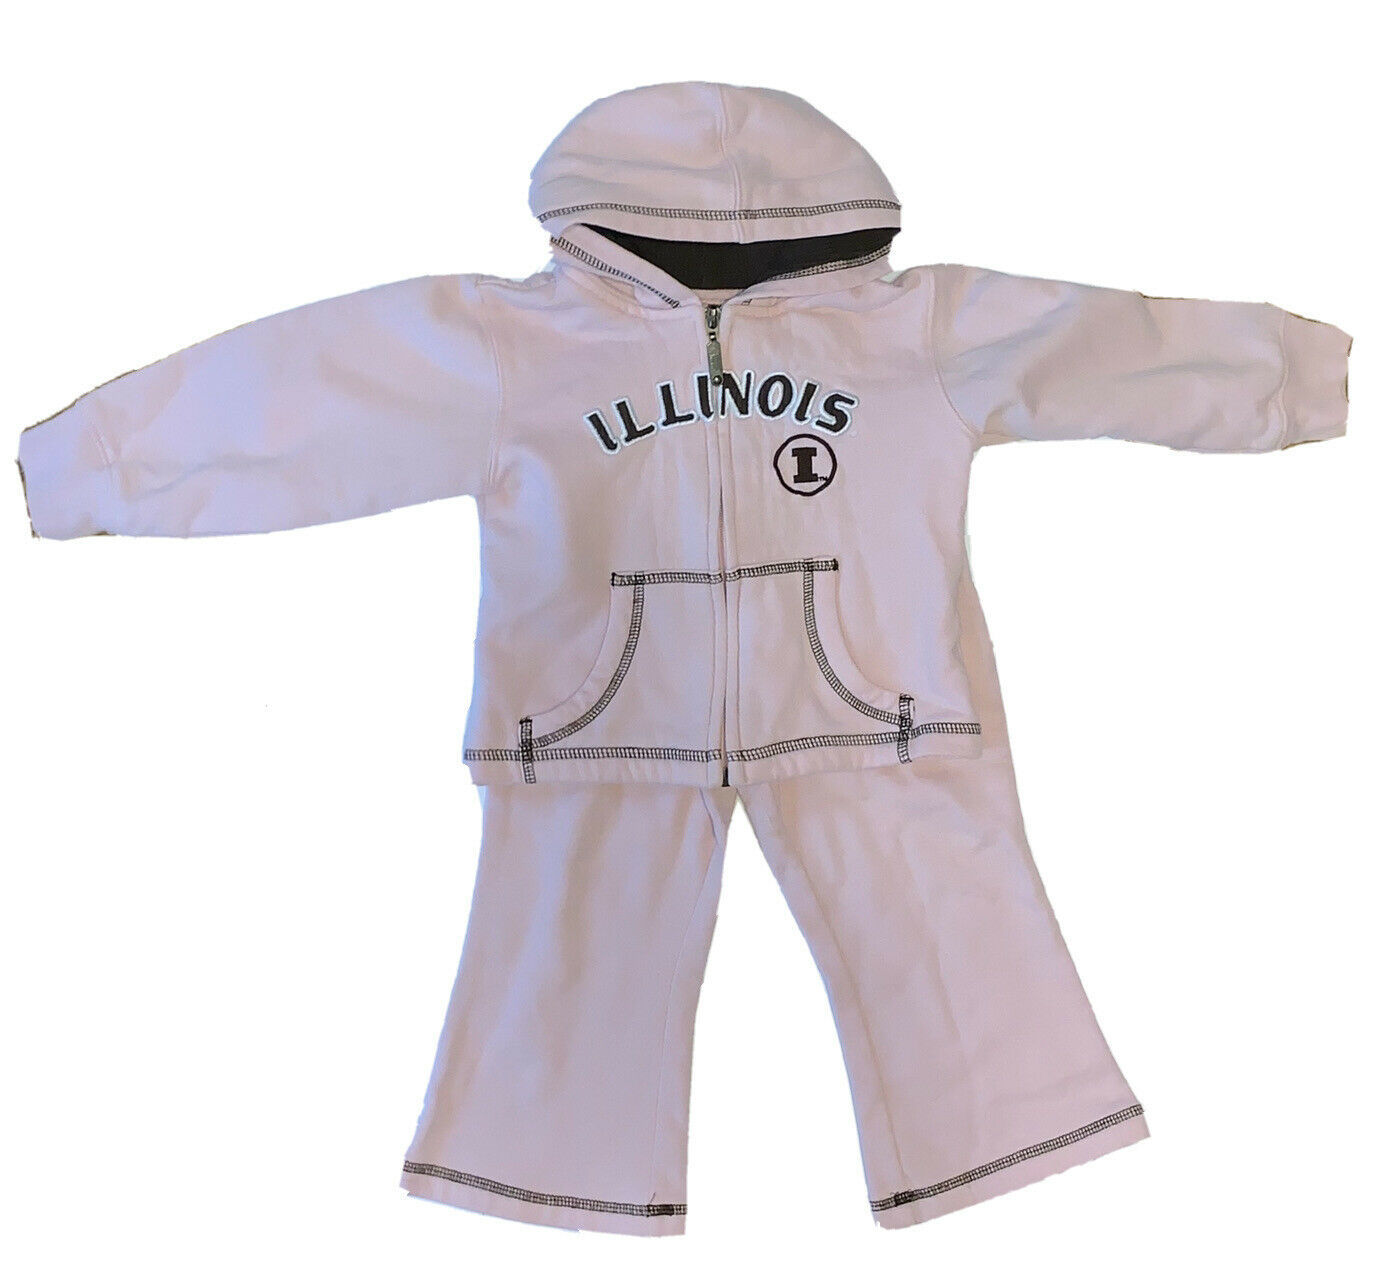 Illinois pink Nike outfit size 2t - $10.00